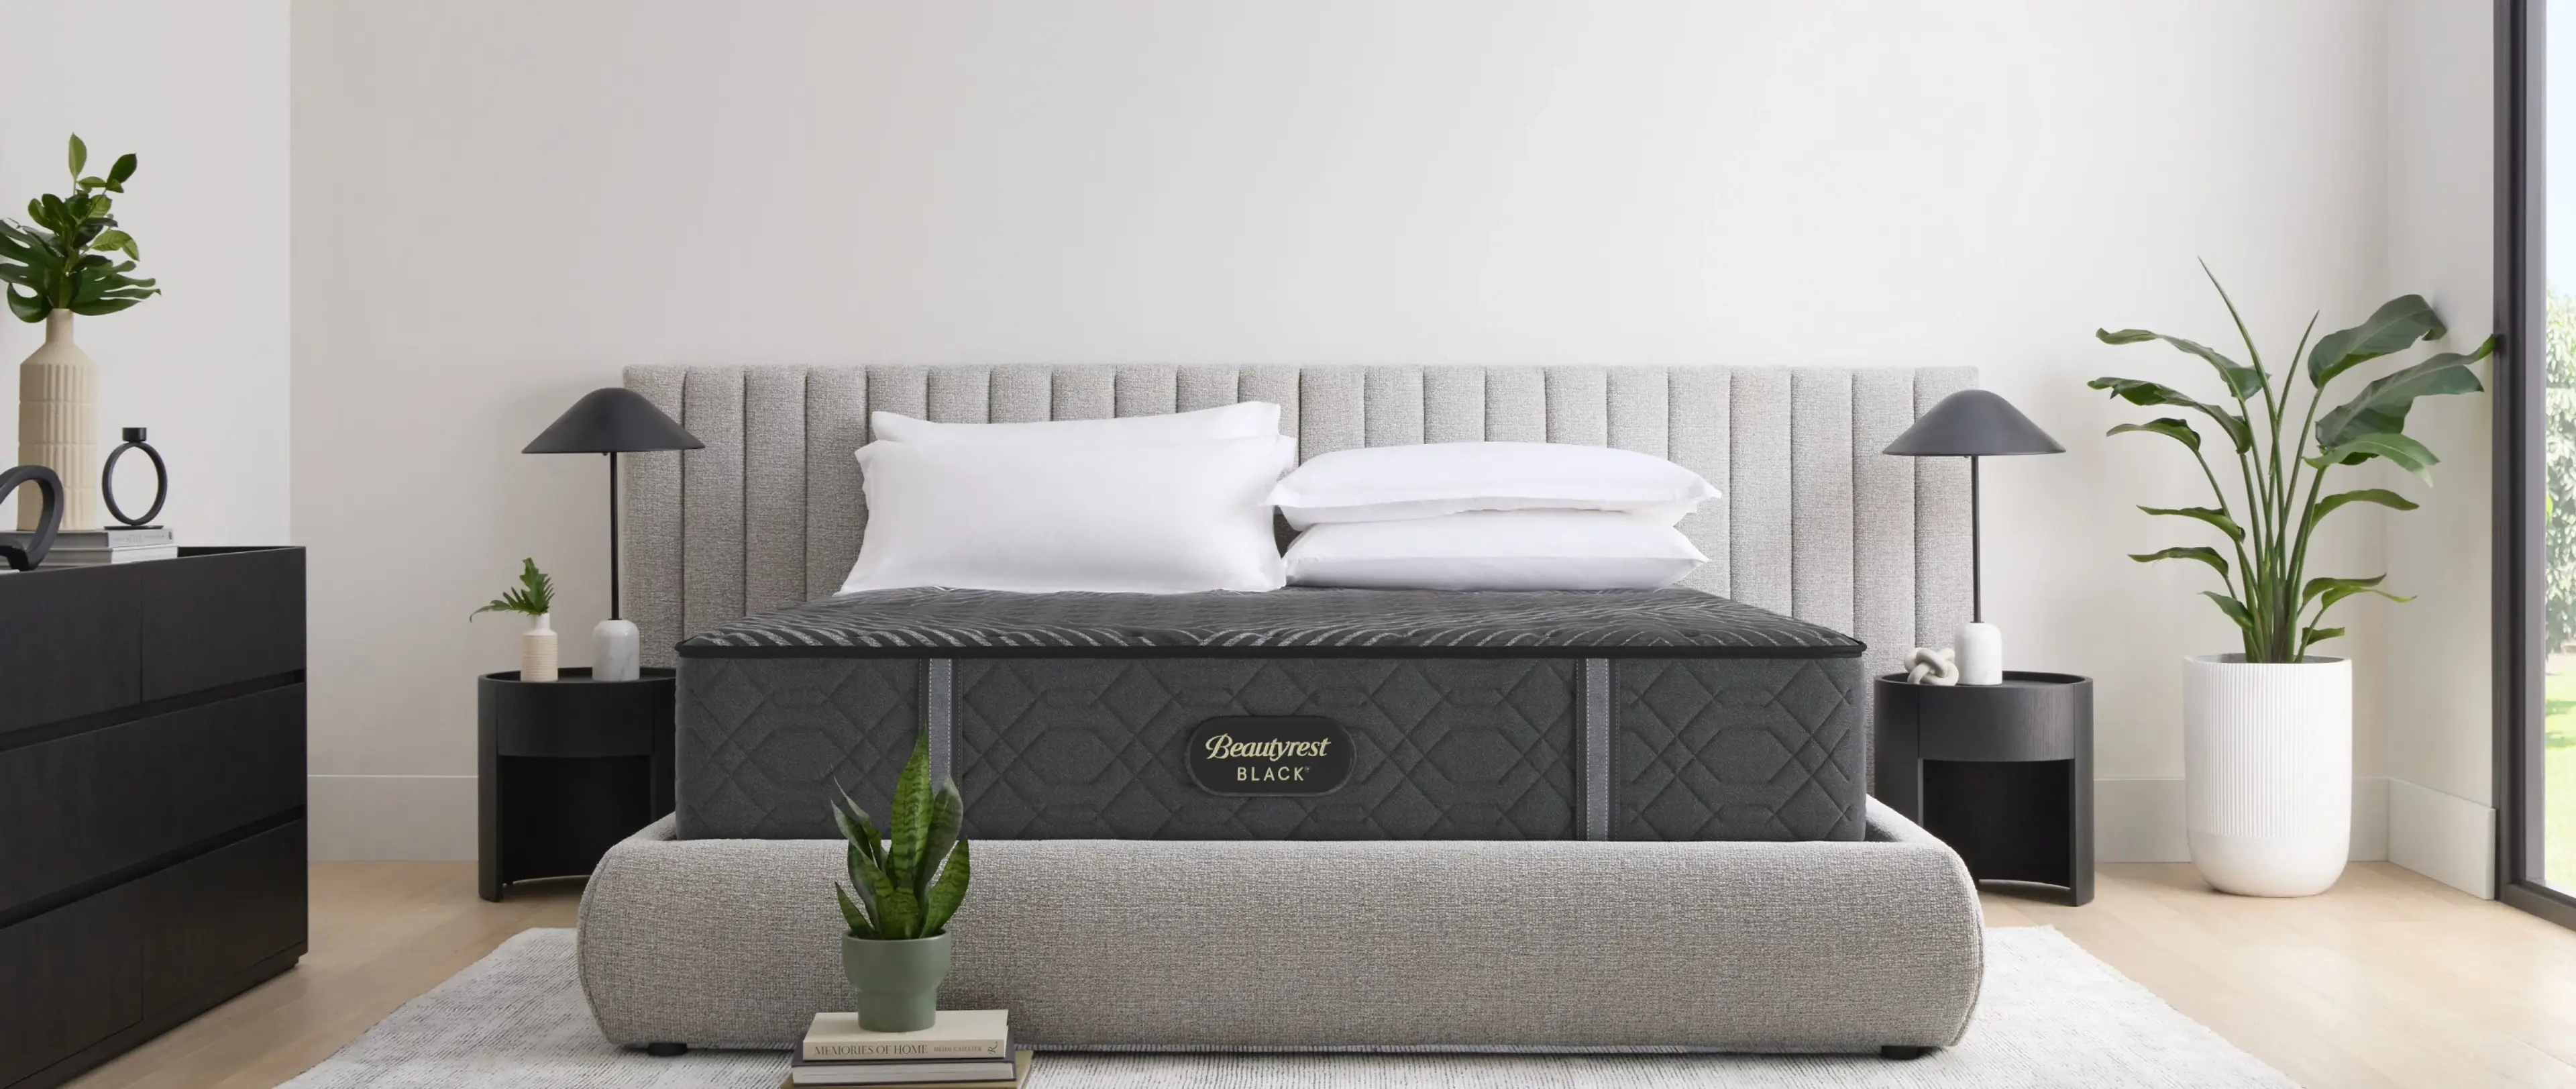 Save up to $1000 on Top Mattress Brands*